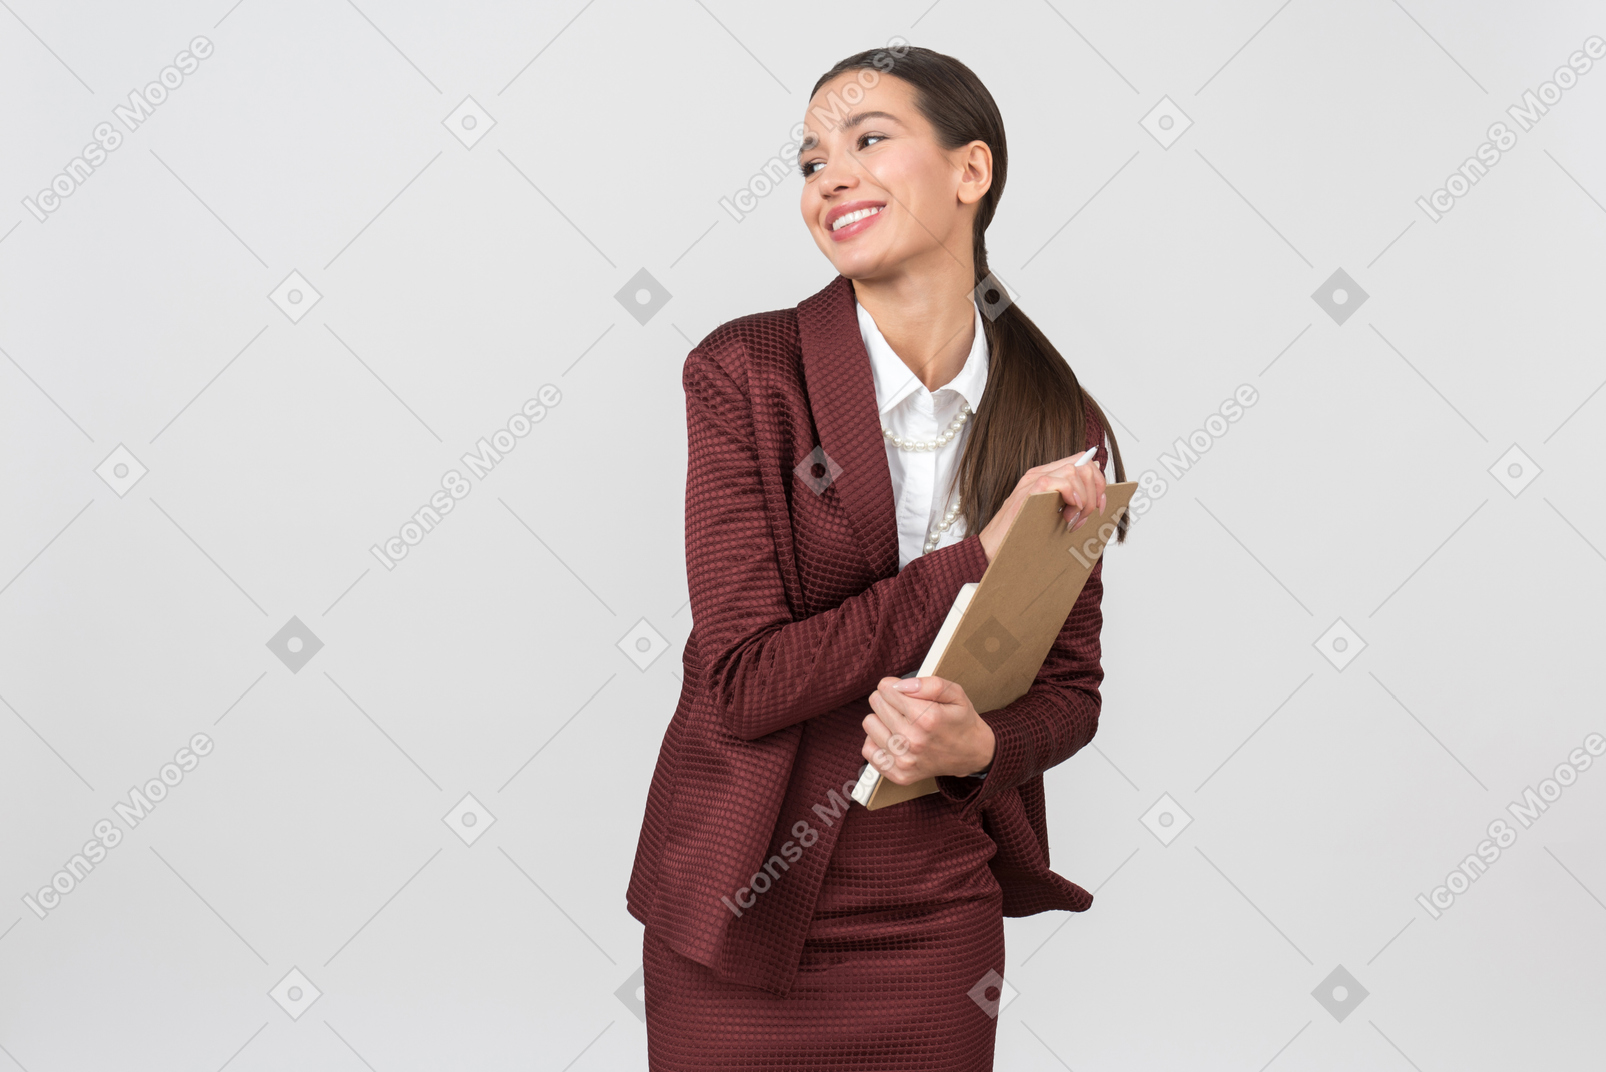 Attractive formally dressed woman thanking for a compliment